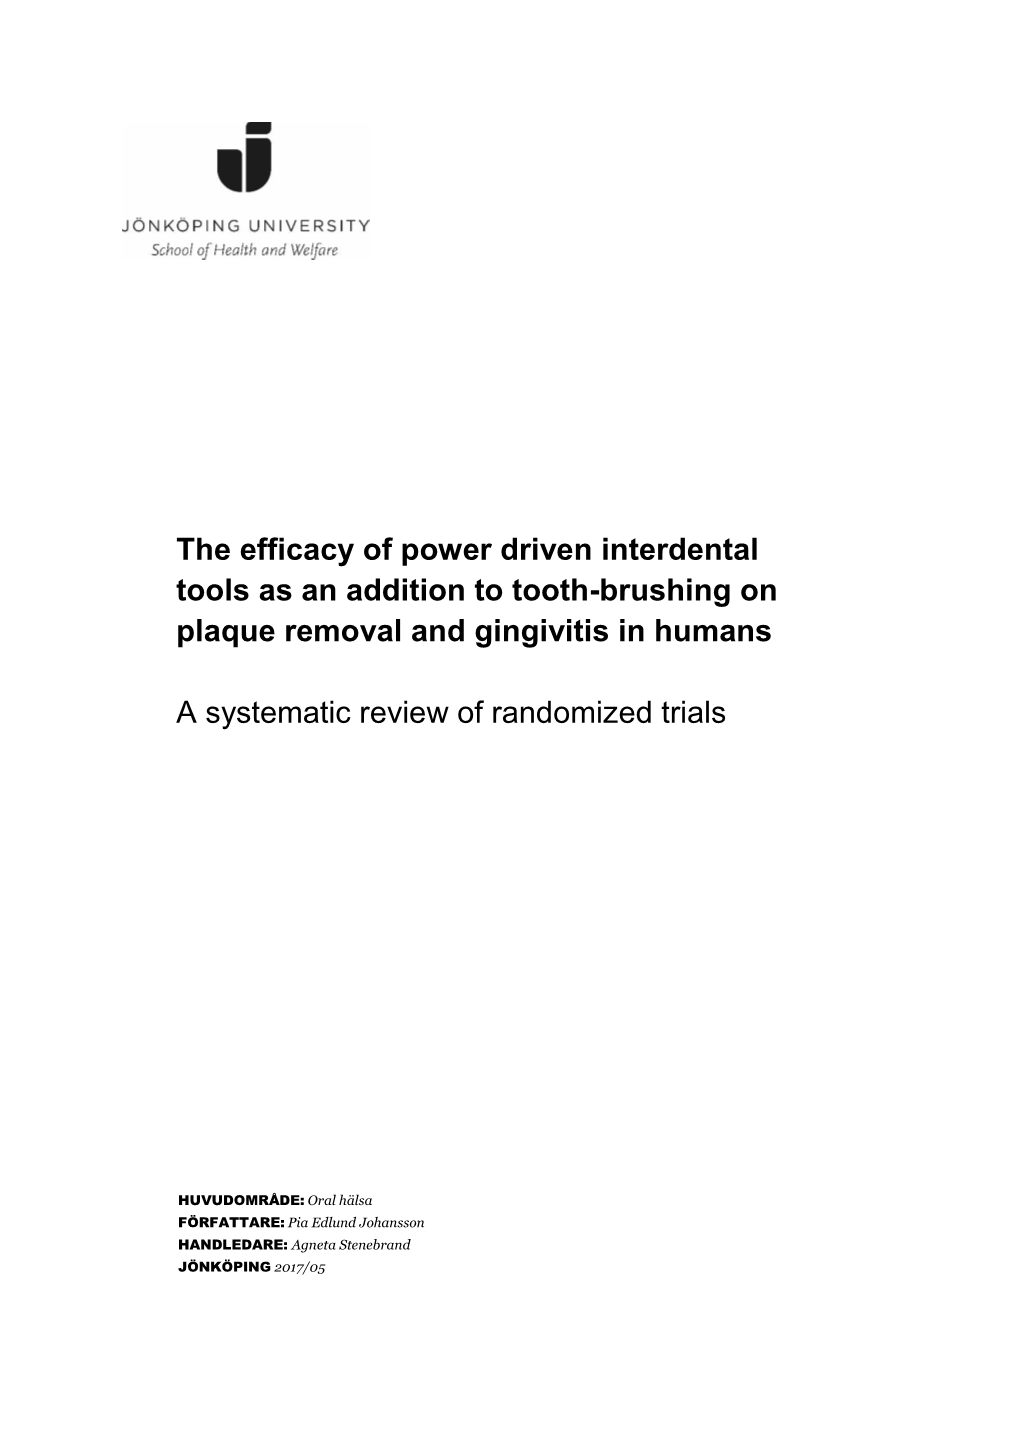 The Efficacy of Power Driven Interdental Tools As an Addition to Tooth-Brushing on Plaque Removal and Gingivitis in Humans